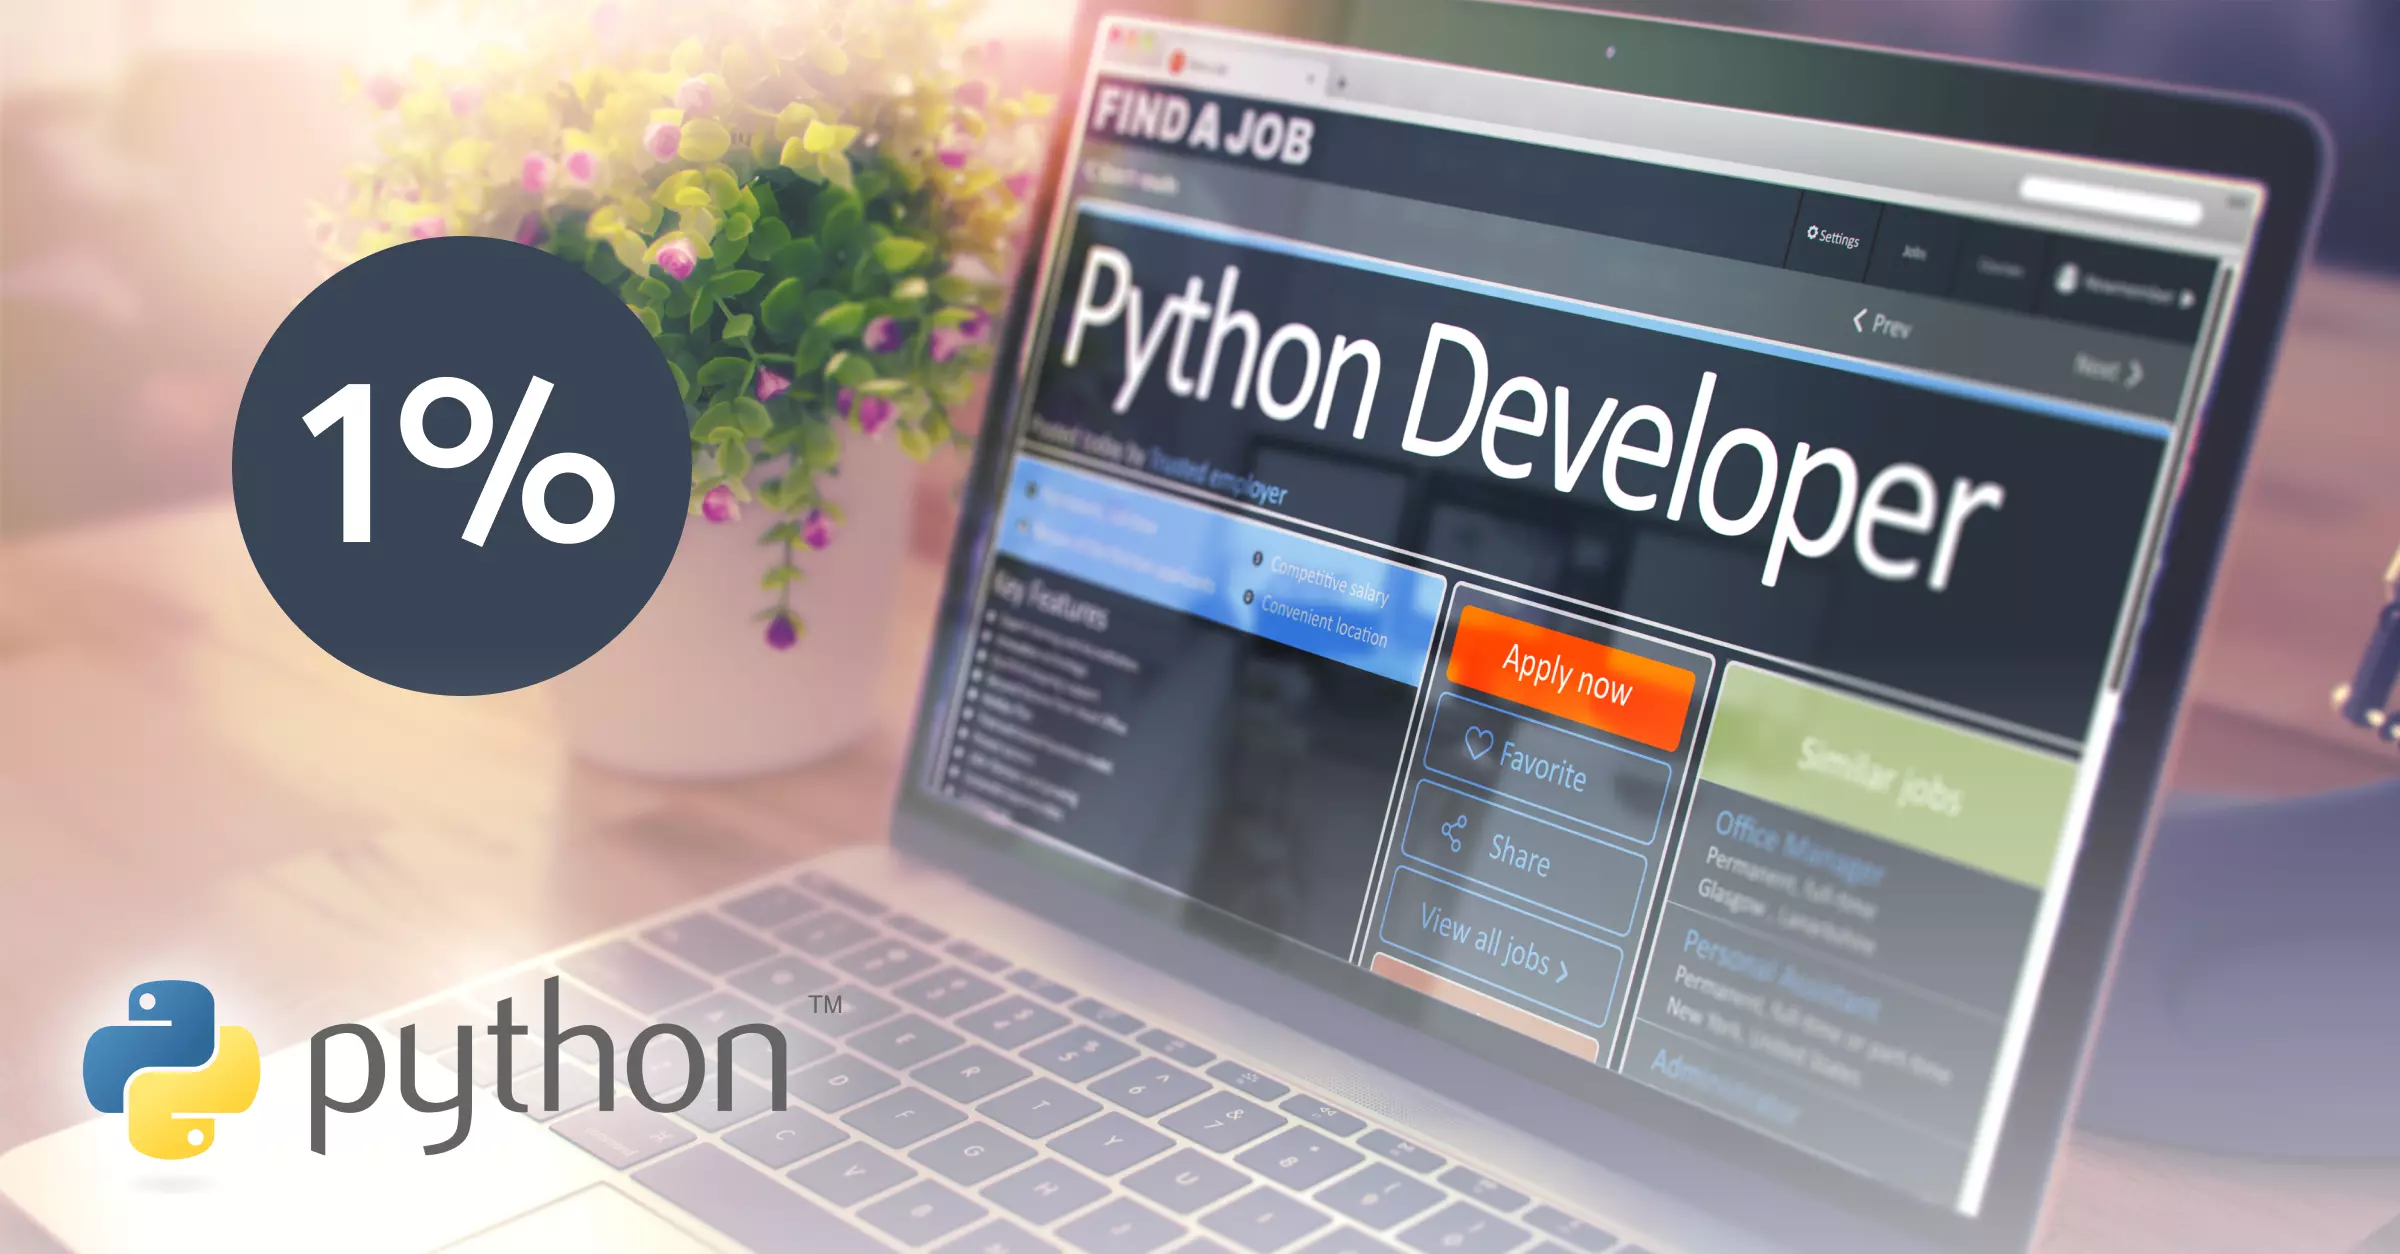 How to Hire the Top 1% of IT Talent Python Developers